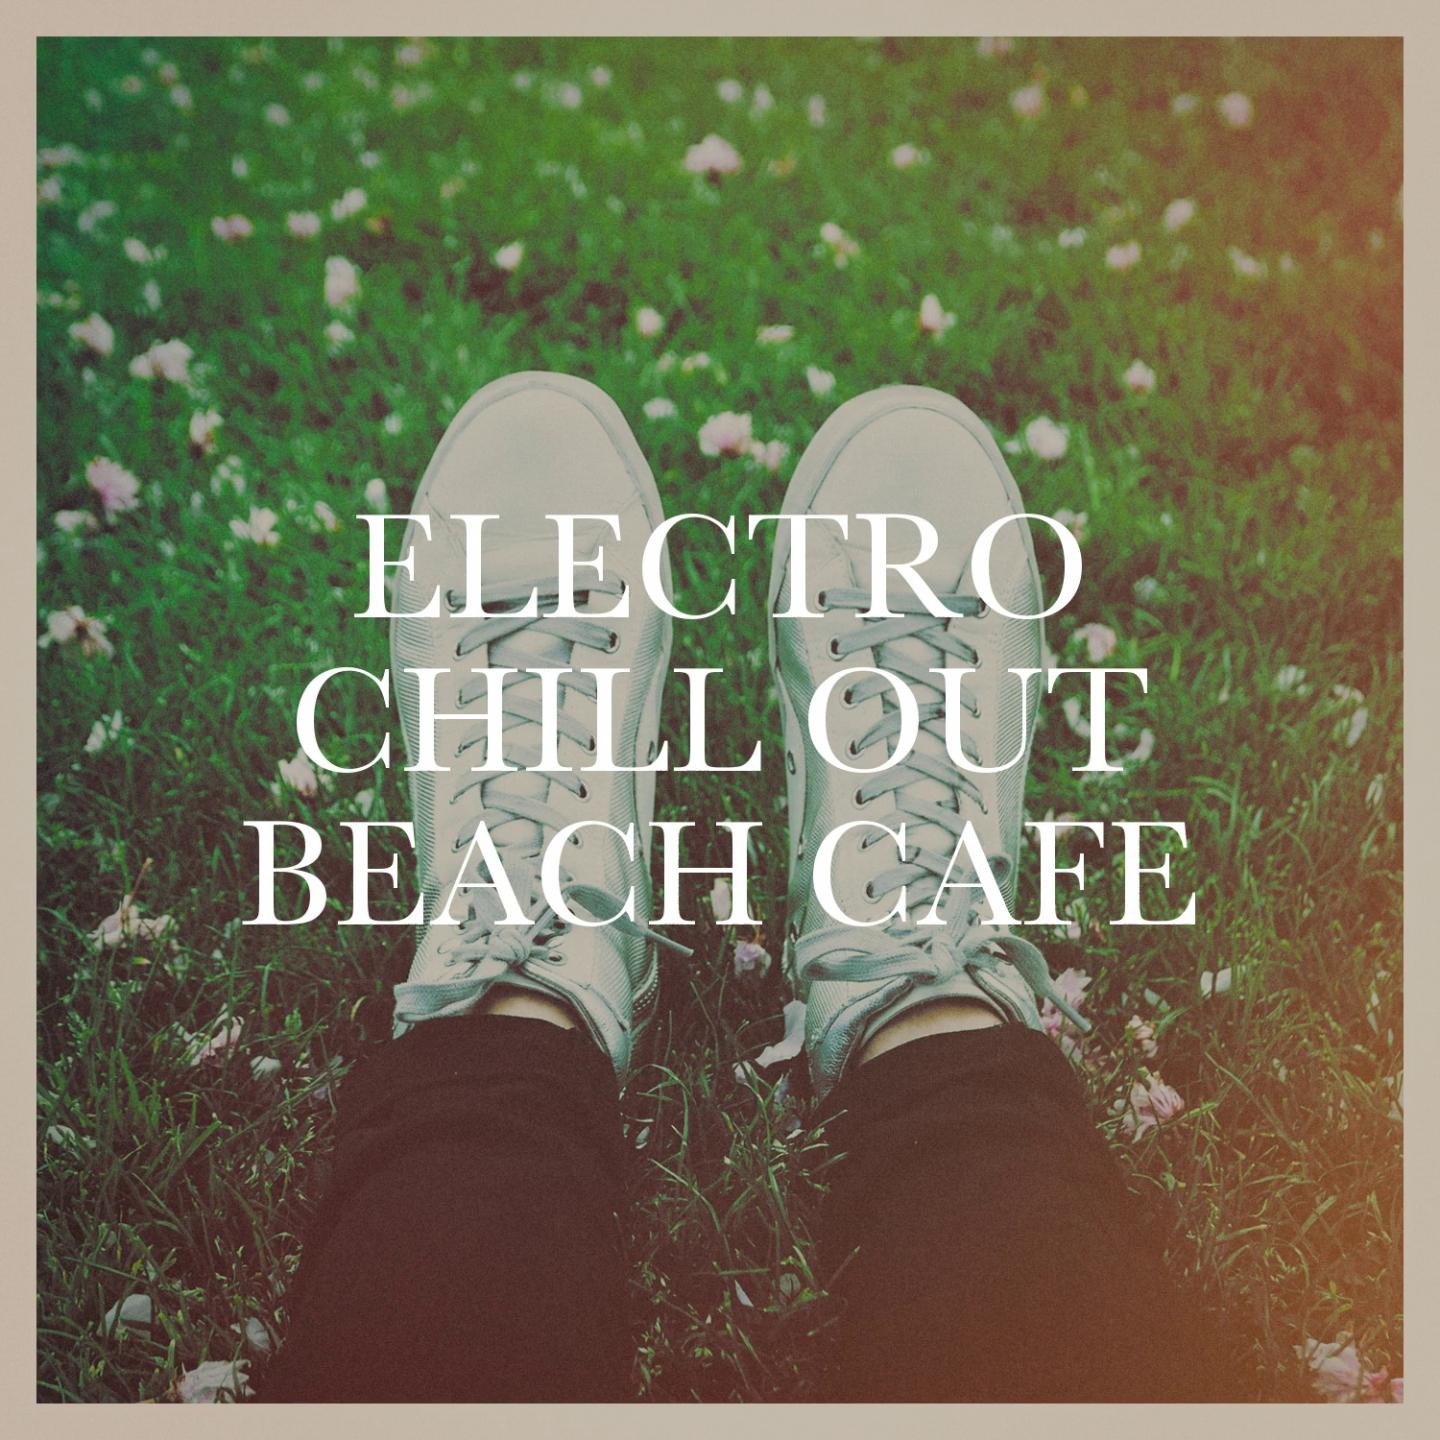 Electro Chill out Beach Cafe